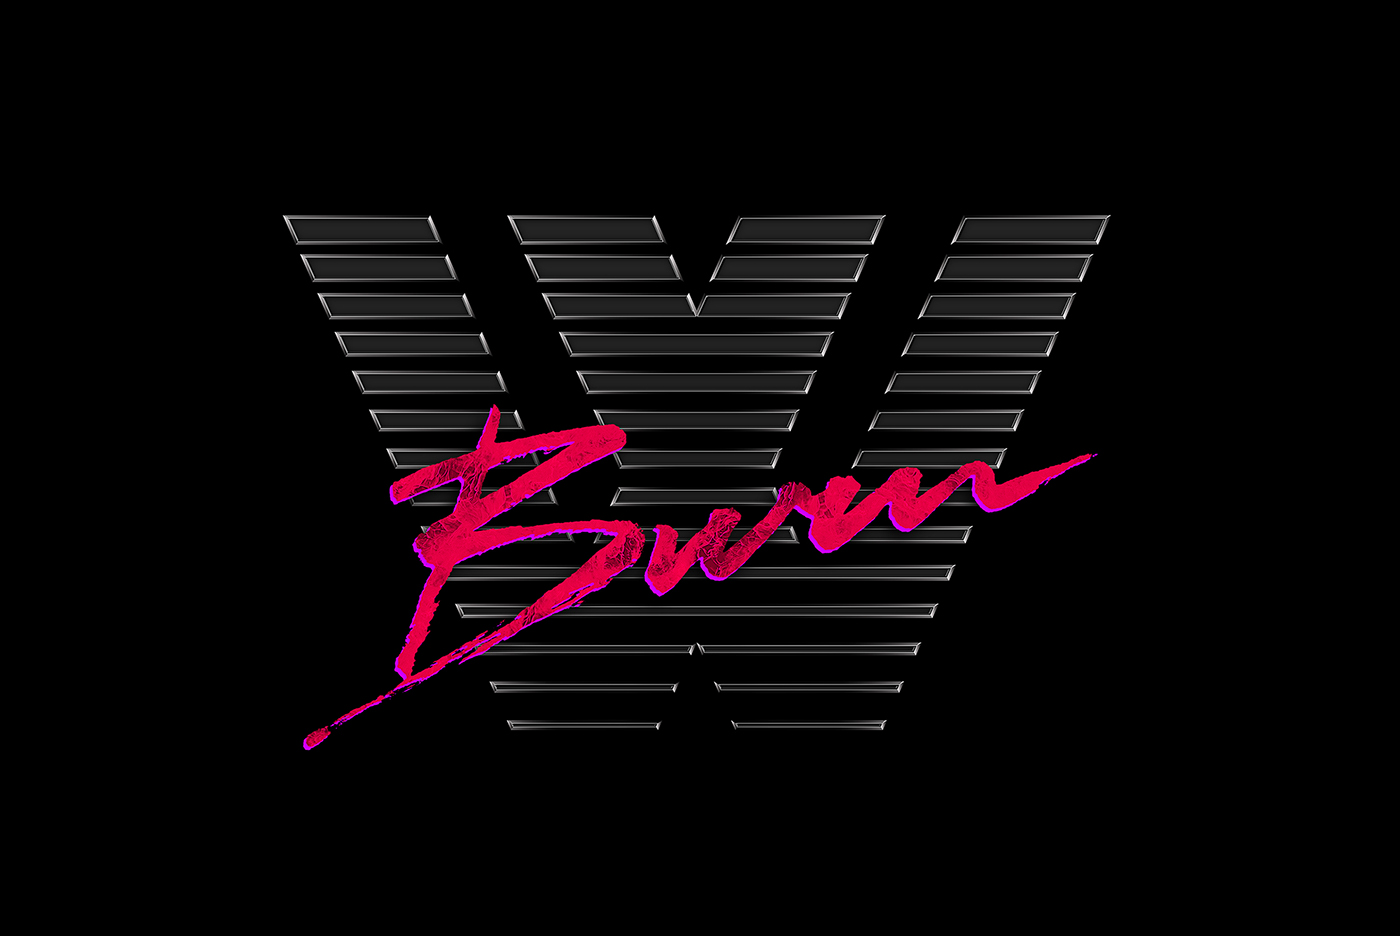 Synthwave darkwave 80s Outrun SYNTH old Retro retrowave logo